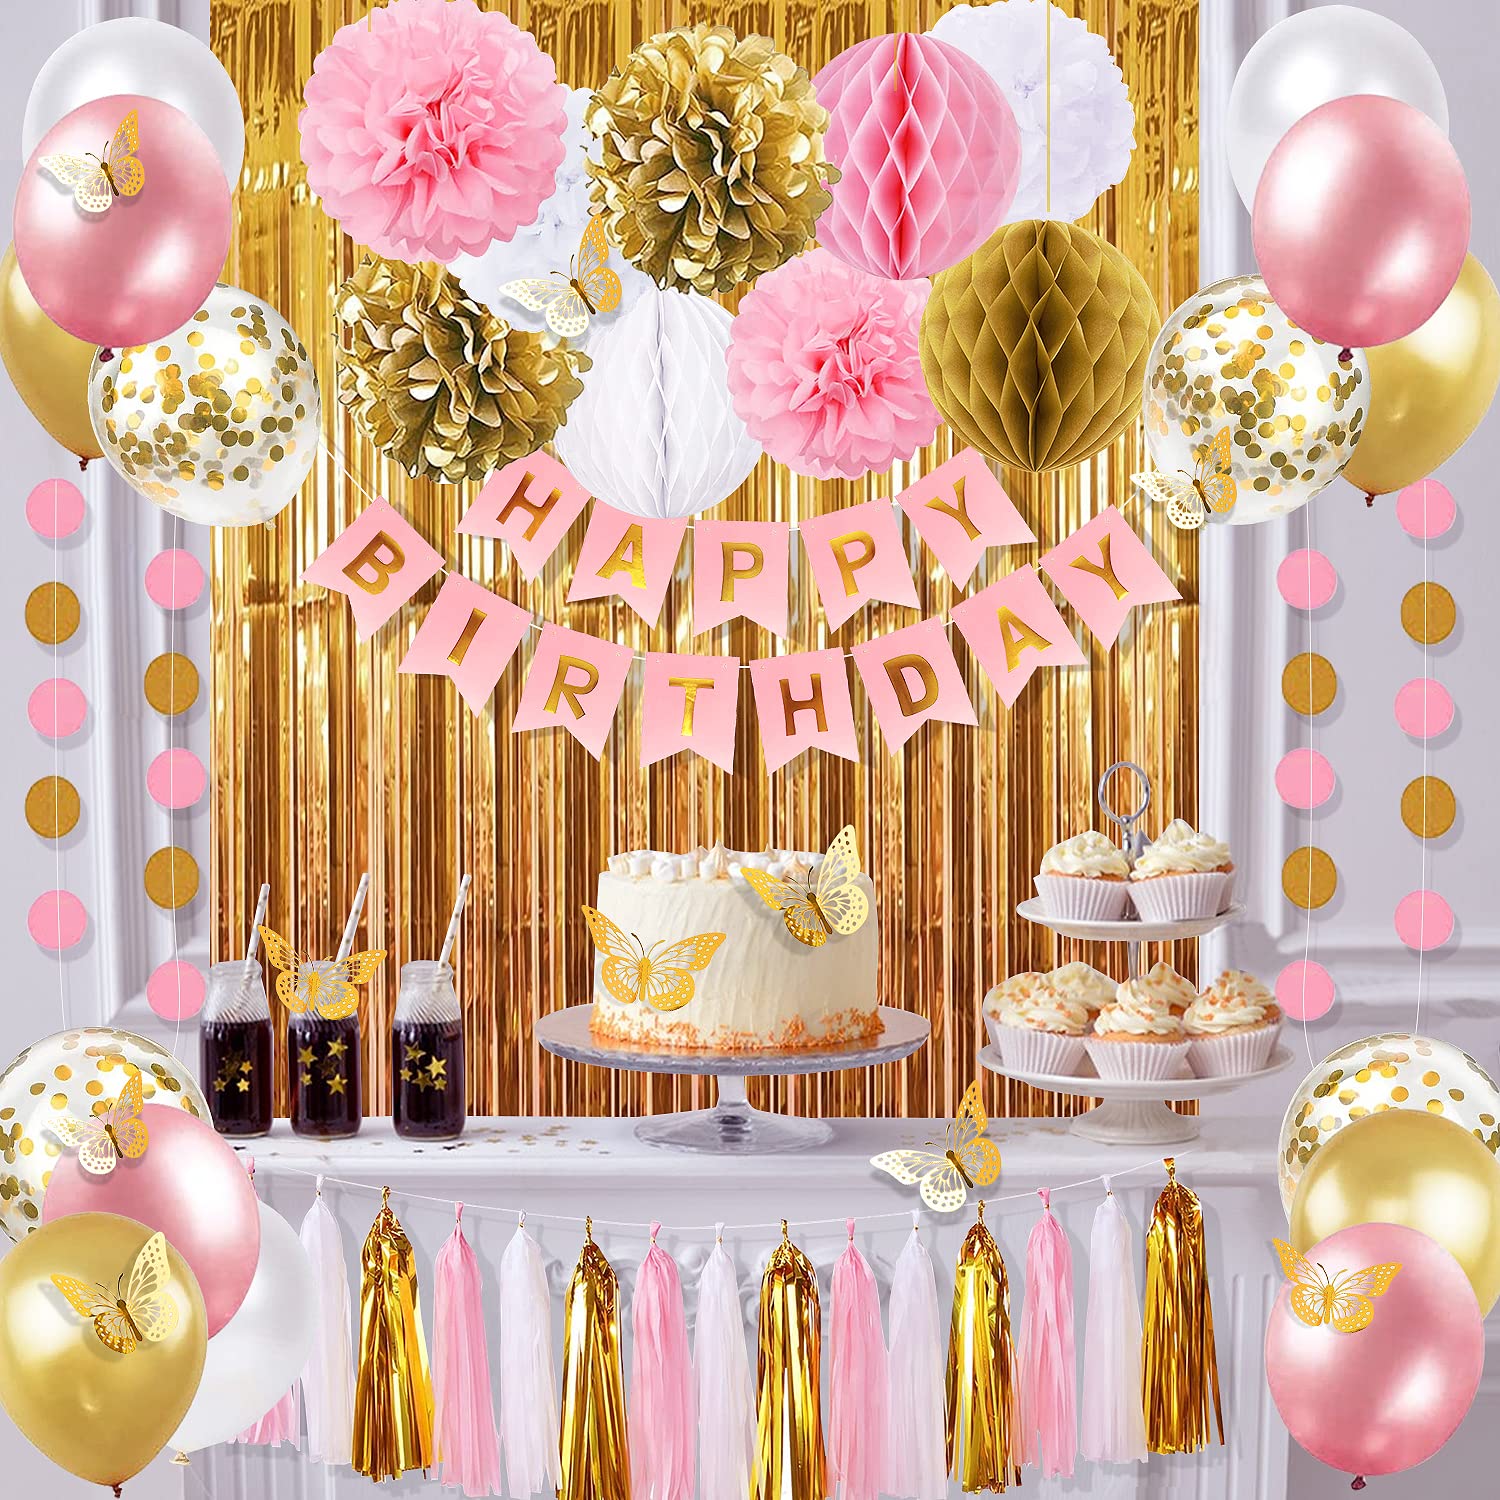 Pink and Gold Birthday Party Decorations for Women with Happy Birthday Banner,Curtains, Butterfly Wall,Circle Dots Garland,Tissue Pompoms,Paper Tassels Garland Birthday for Her